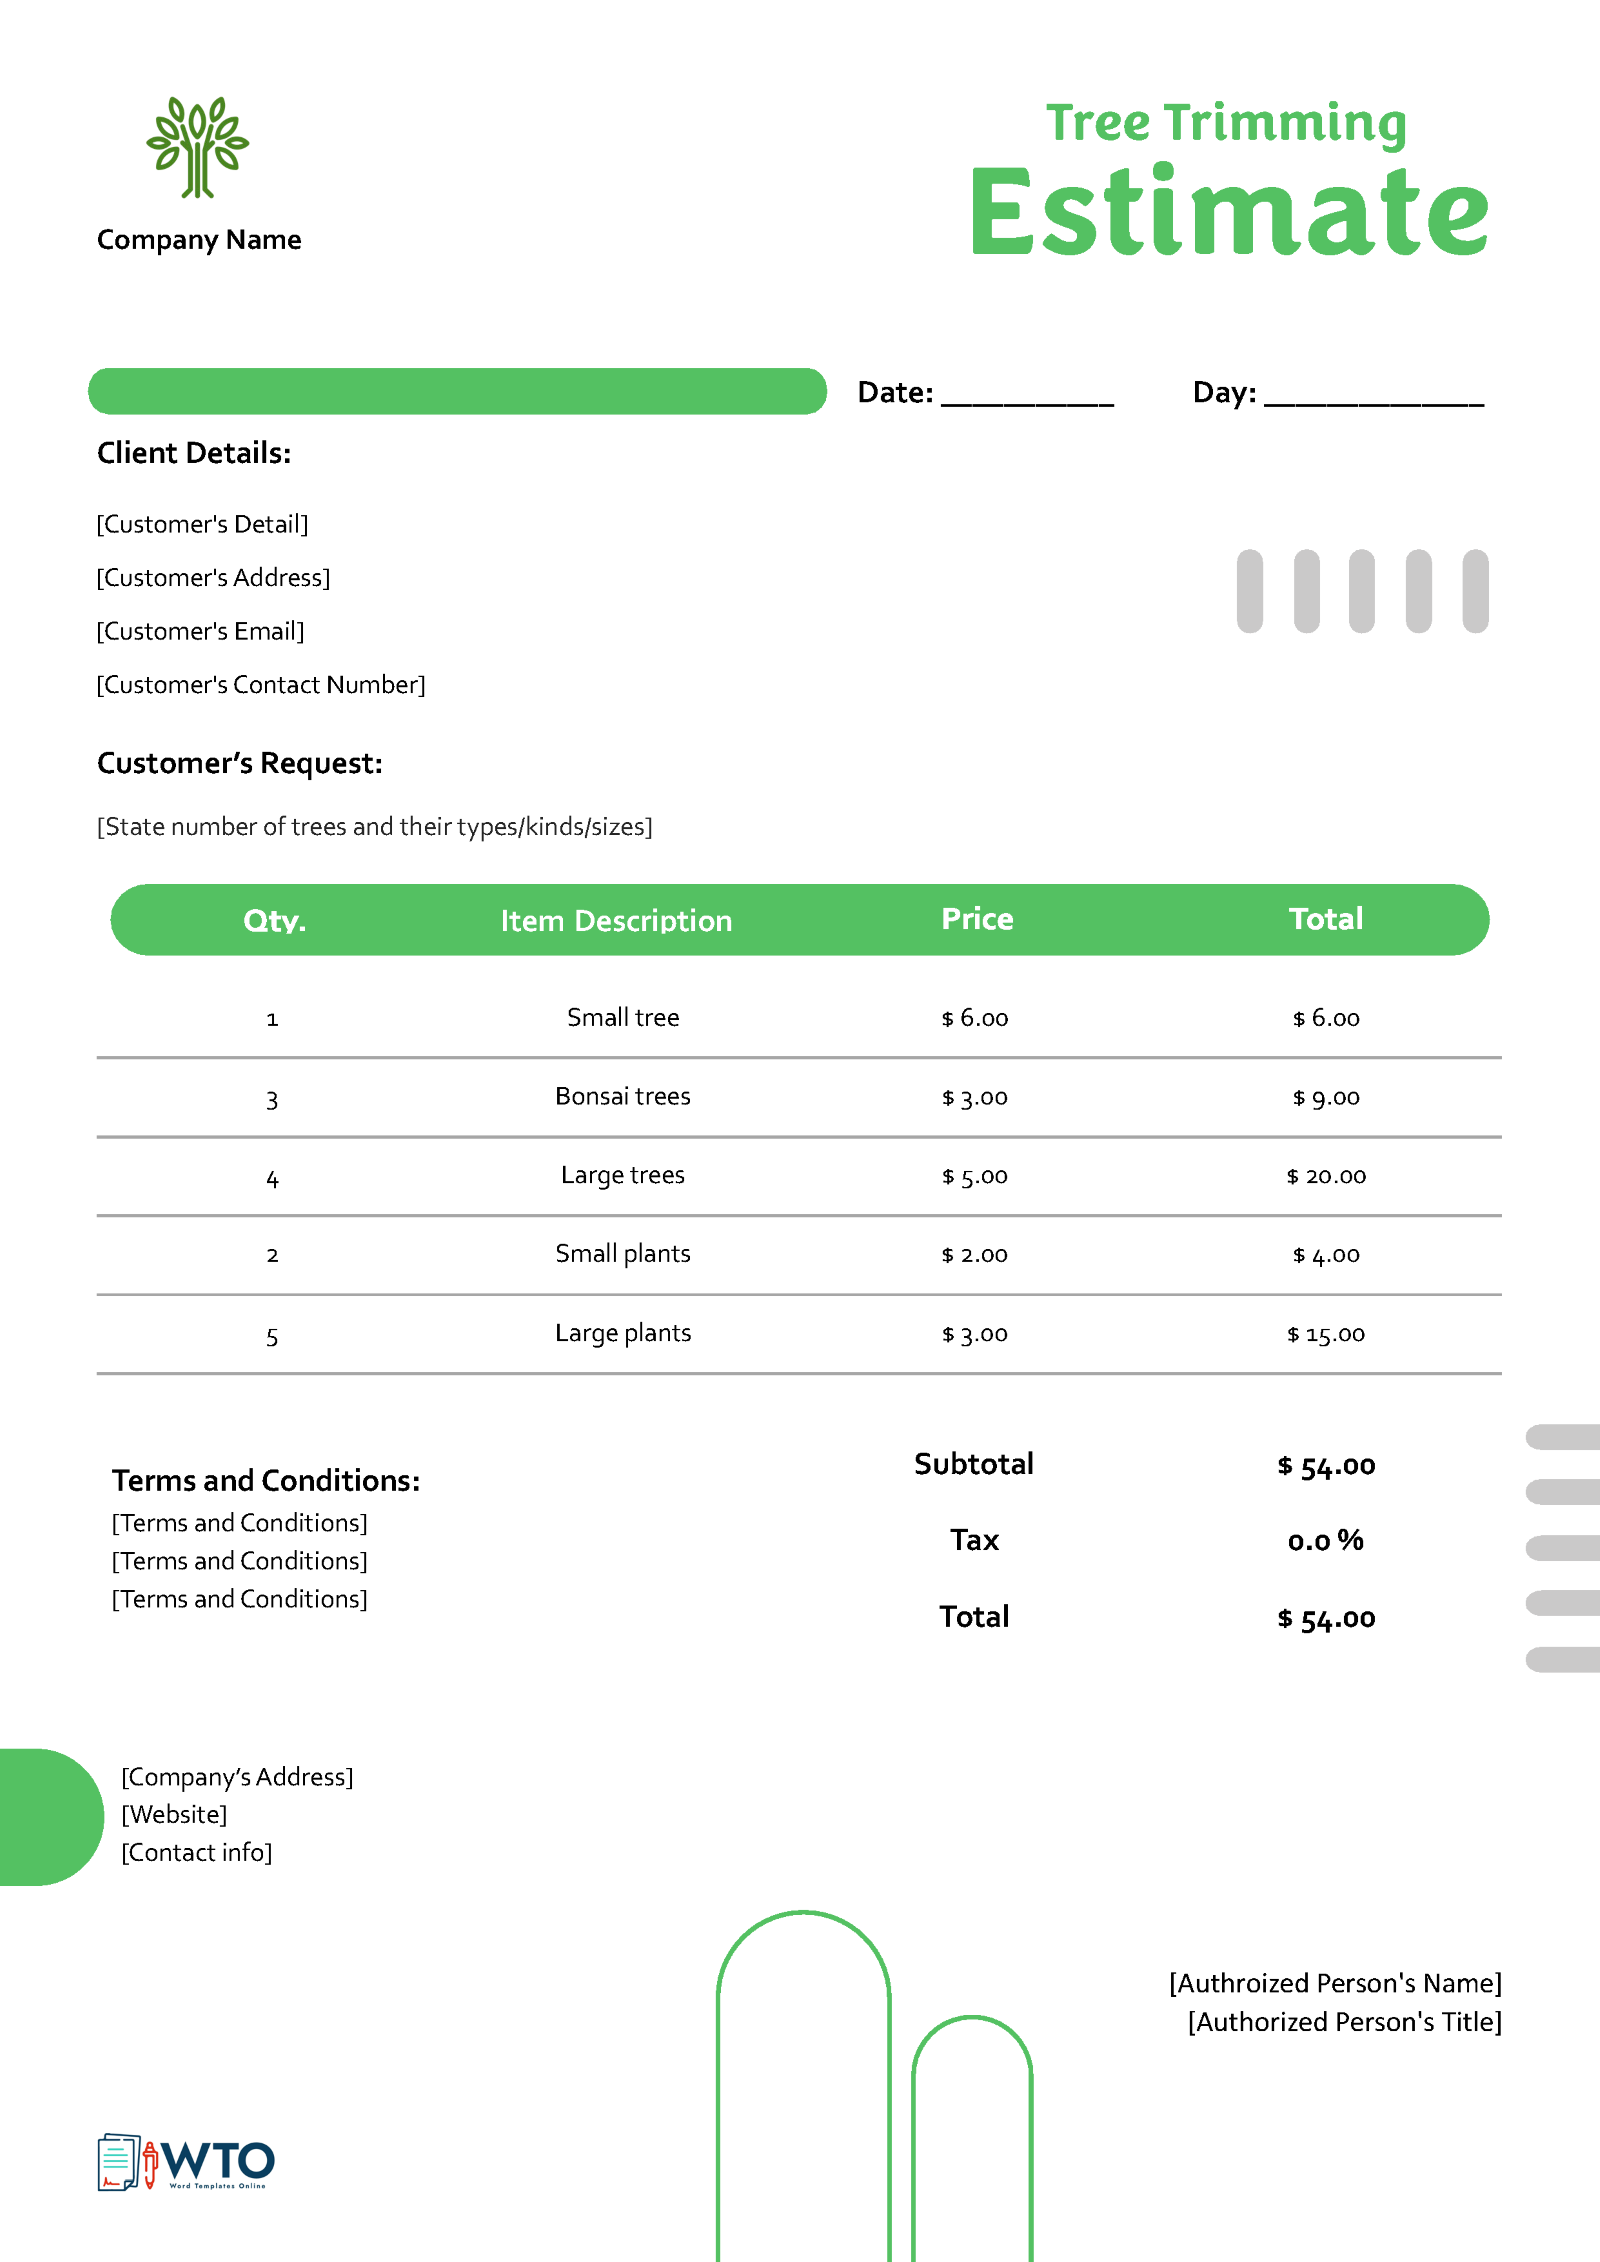 Sample Tree Trimming Estimate: Editable Template for Your Needs